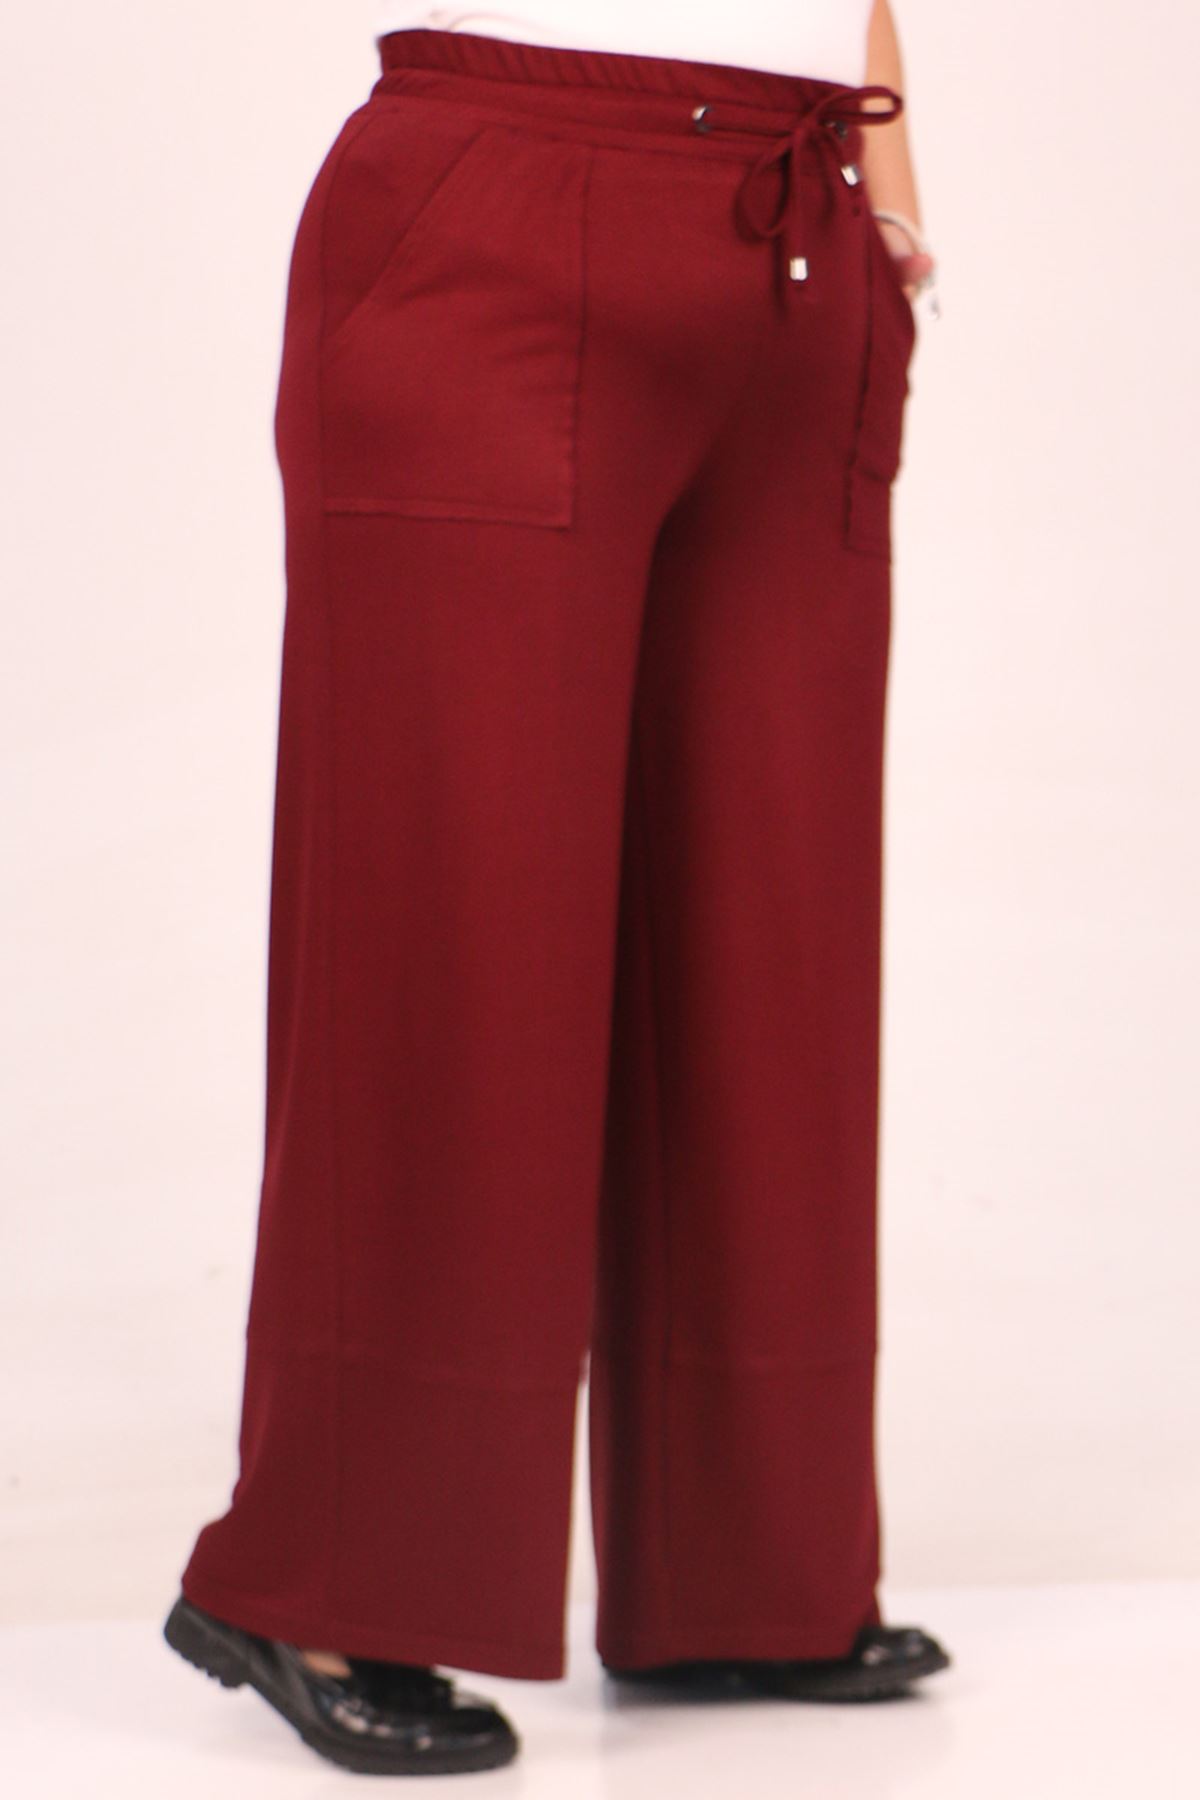 39038 Large Size Elastic Waist Crystal Two Thread Wide Leg Trousers-Burgundy